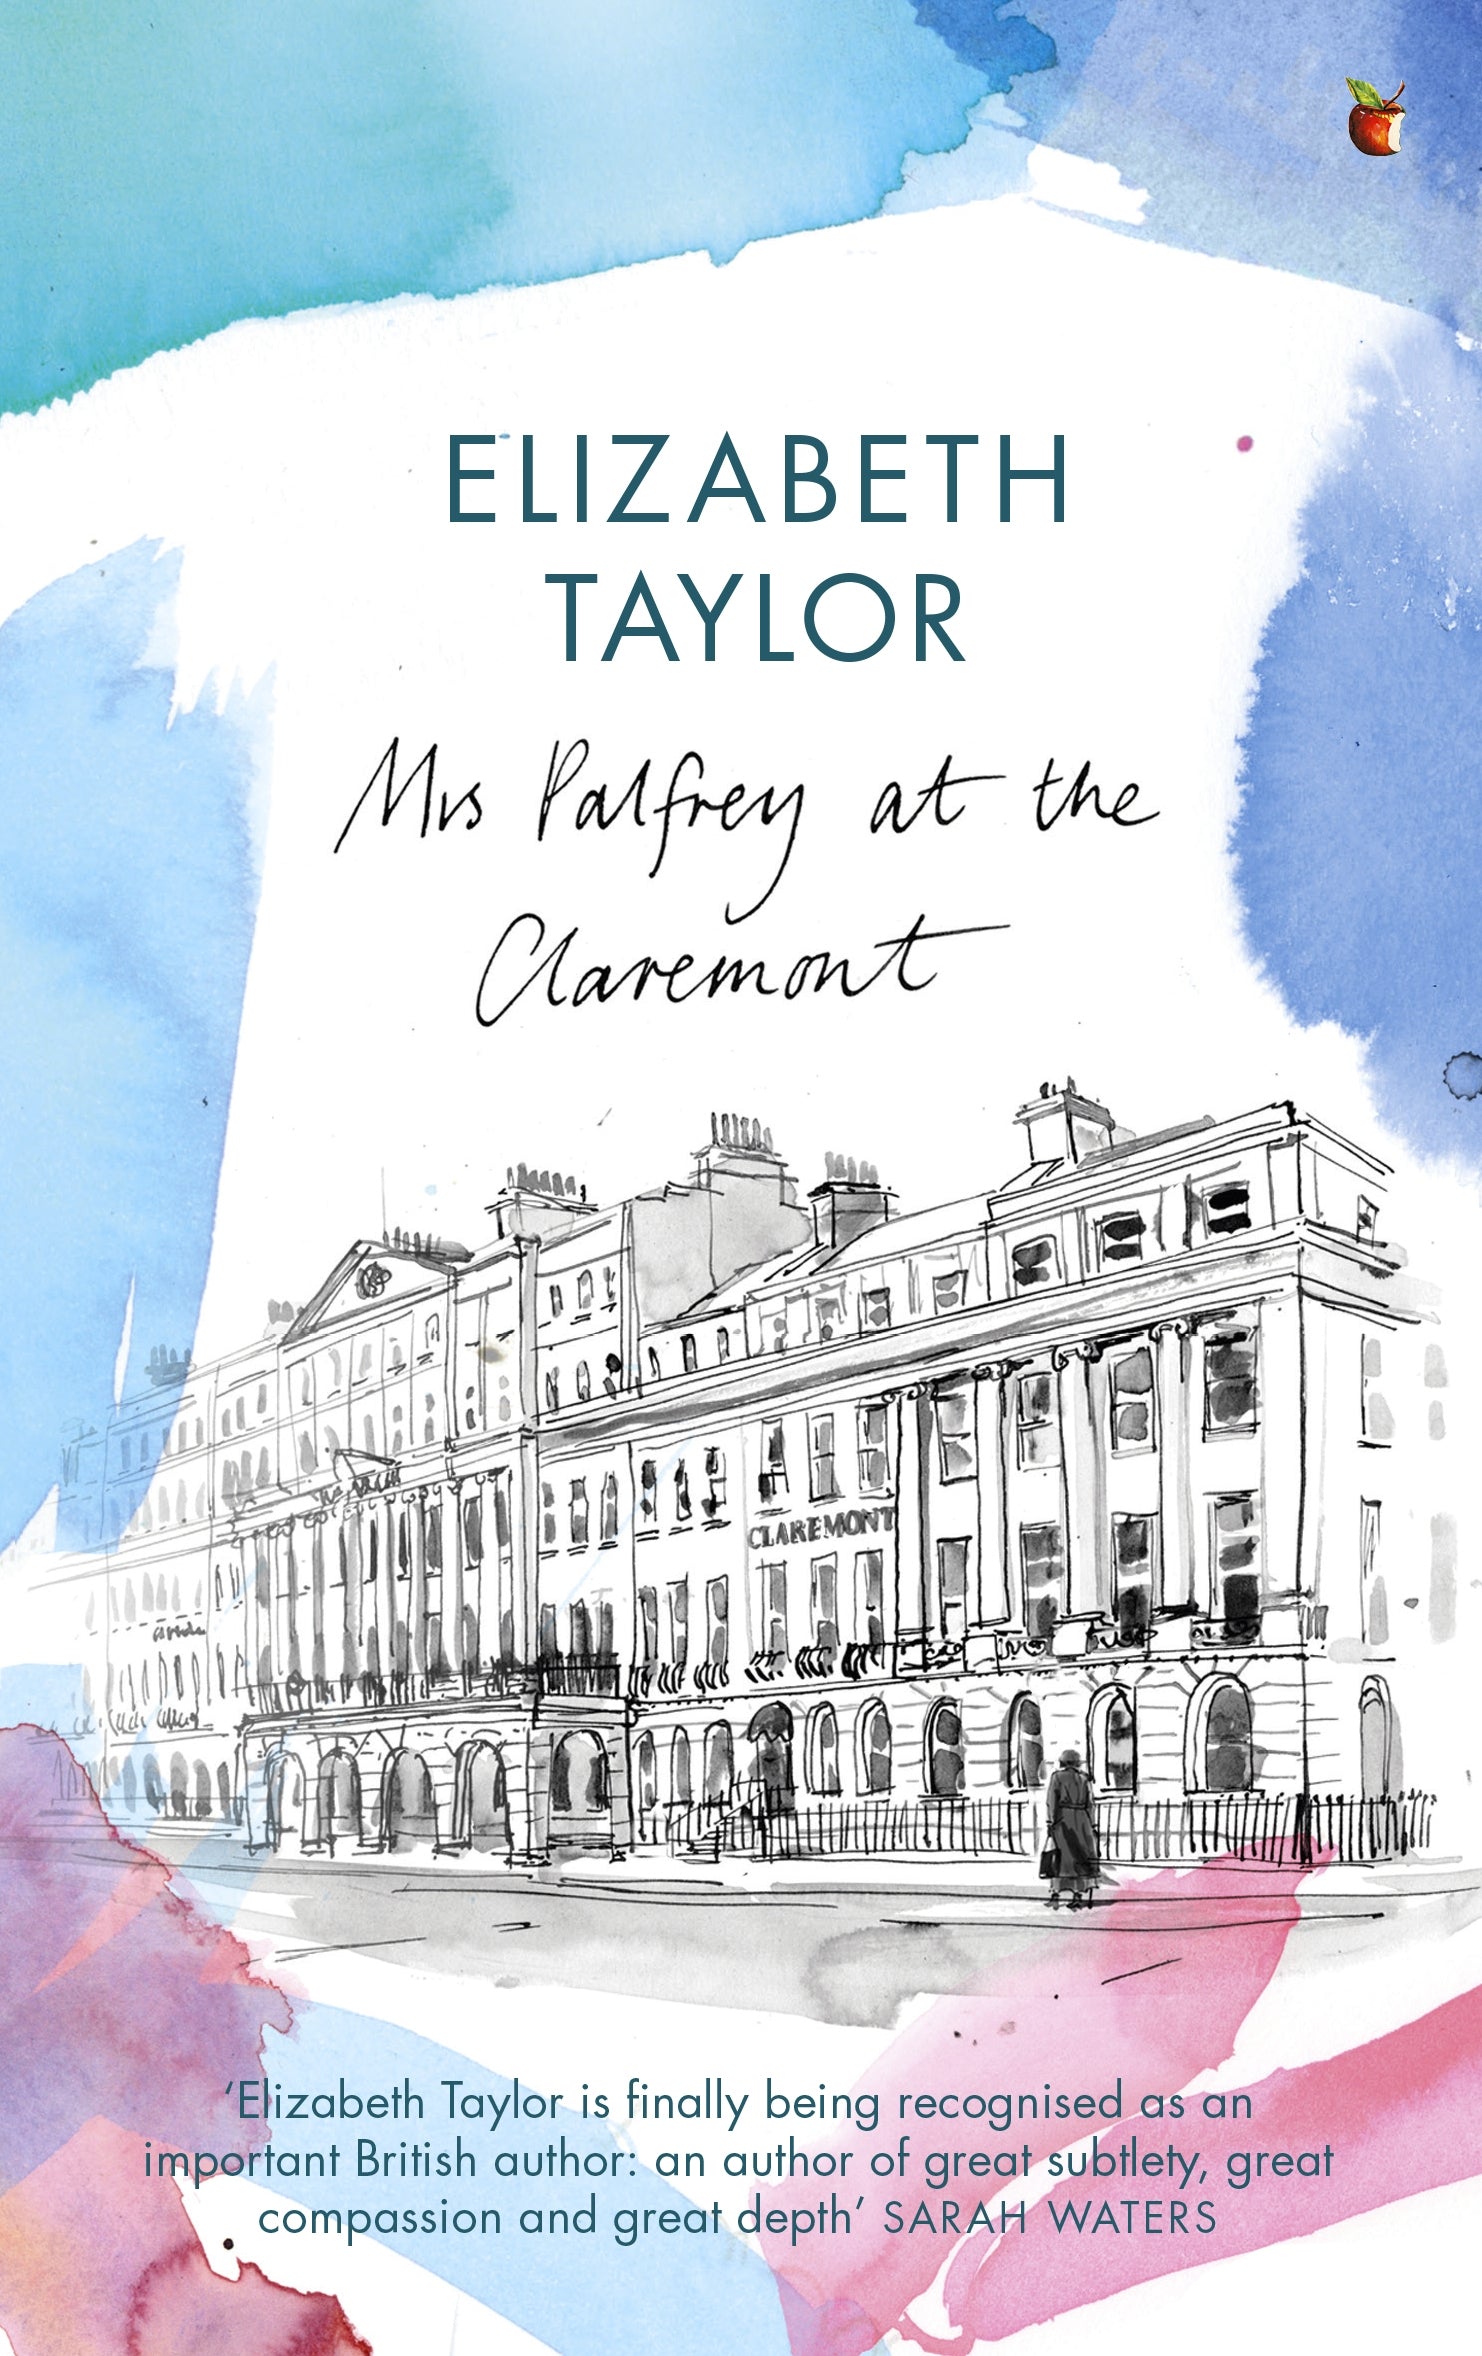 Mrs Palfrey At The Claremont by Elizabeth Taylor